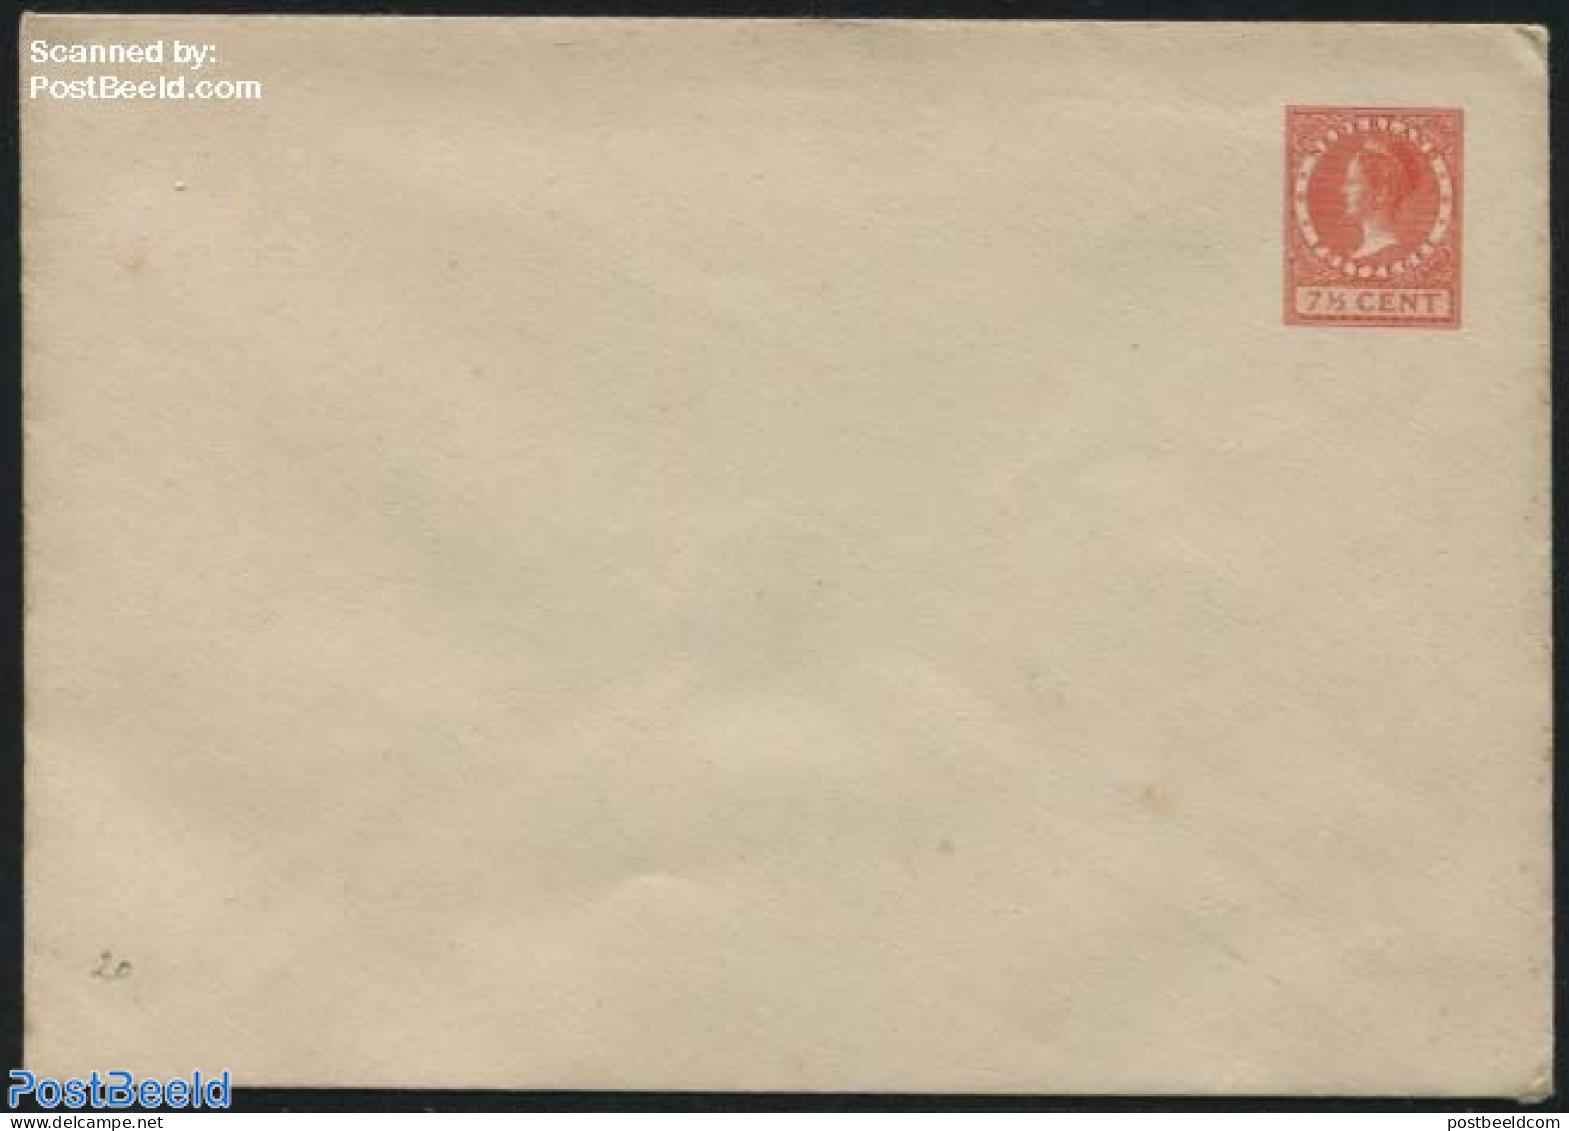 Netherlands 1929 Envelope 7.5c Red, Unused Postal Stationary - Covers & Documents